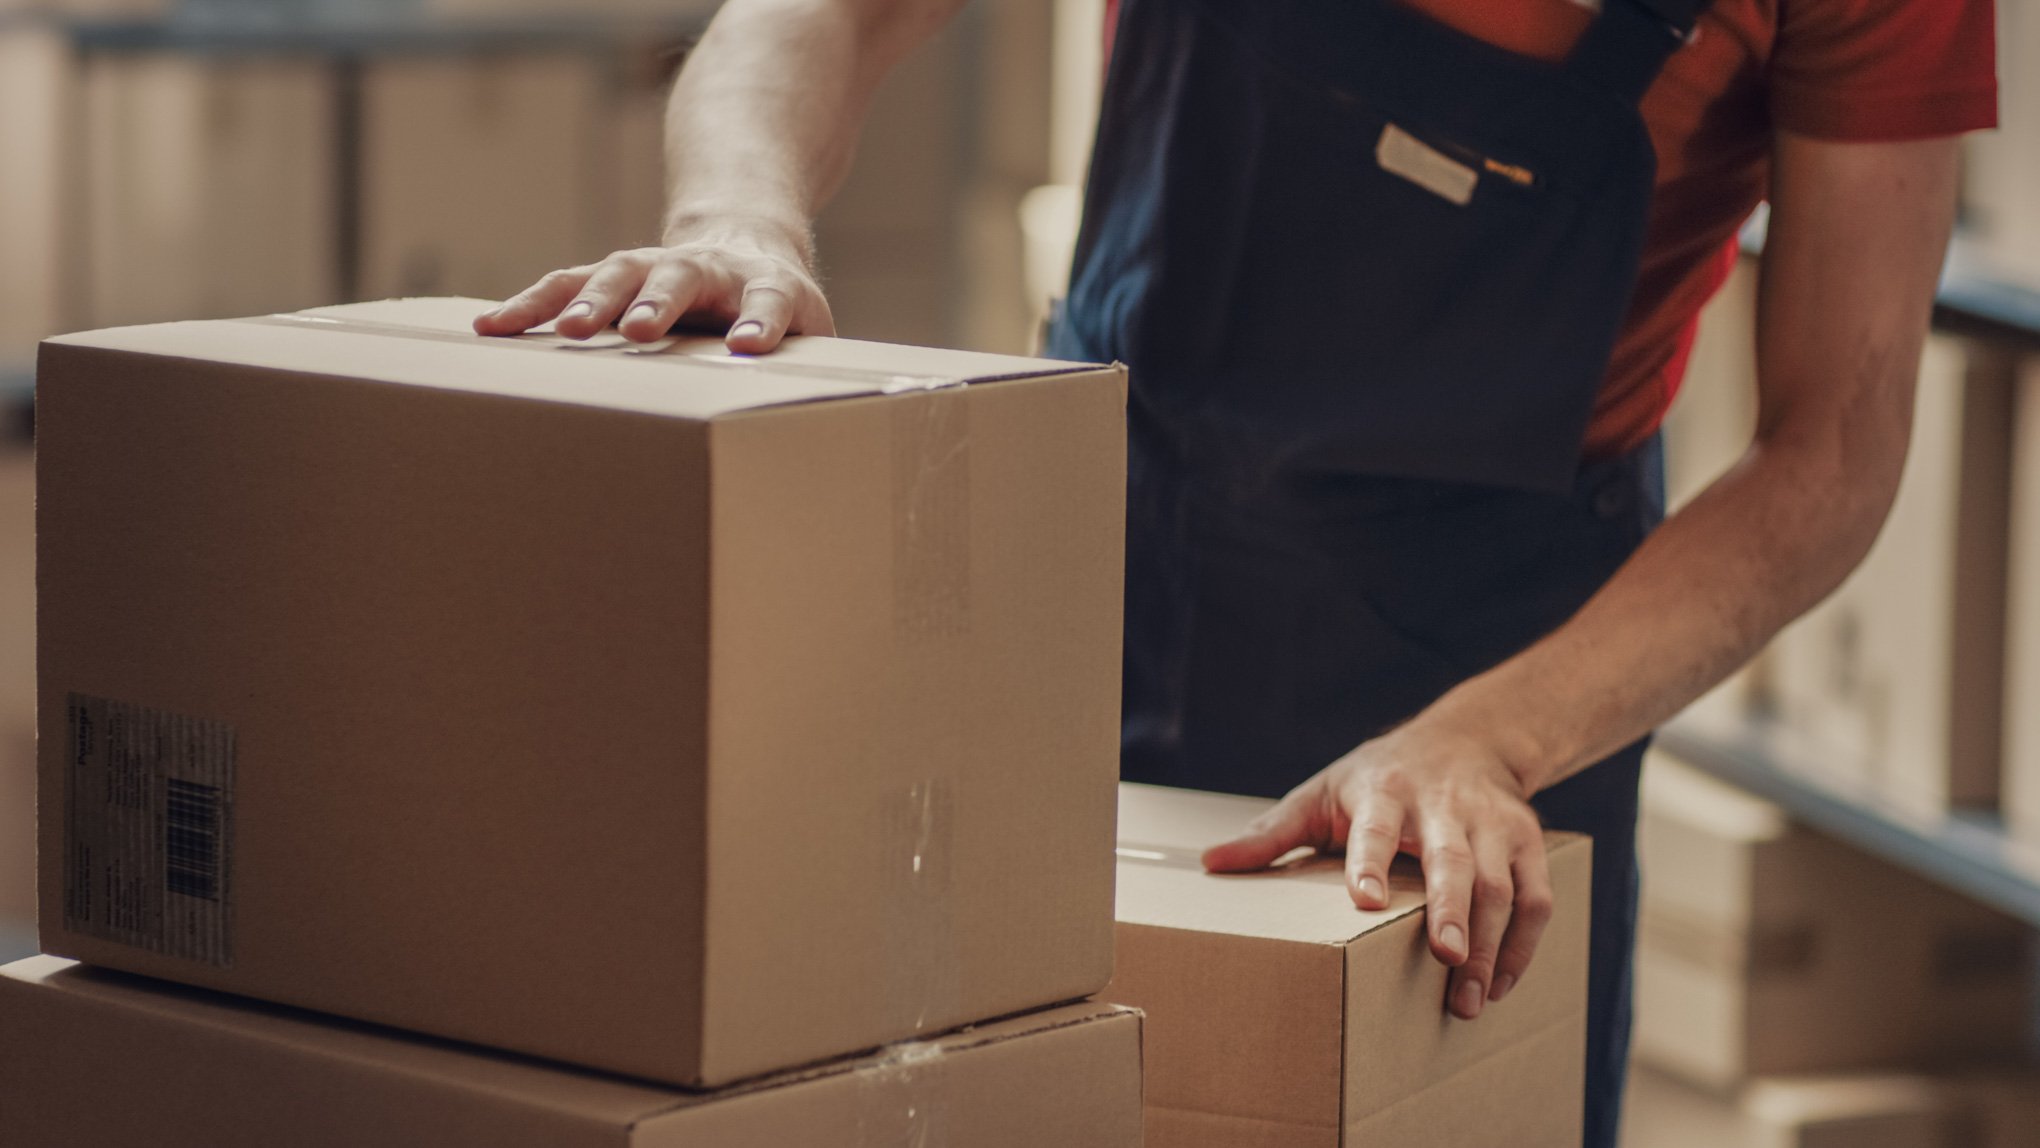 Warehouse worker collects parcels to improve  warehouse efficiency